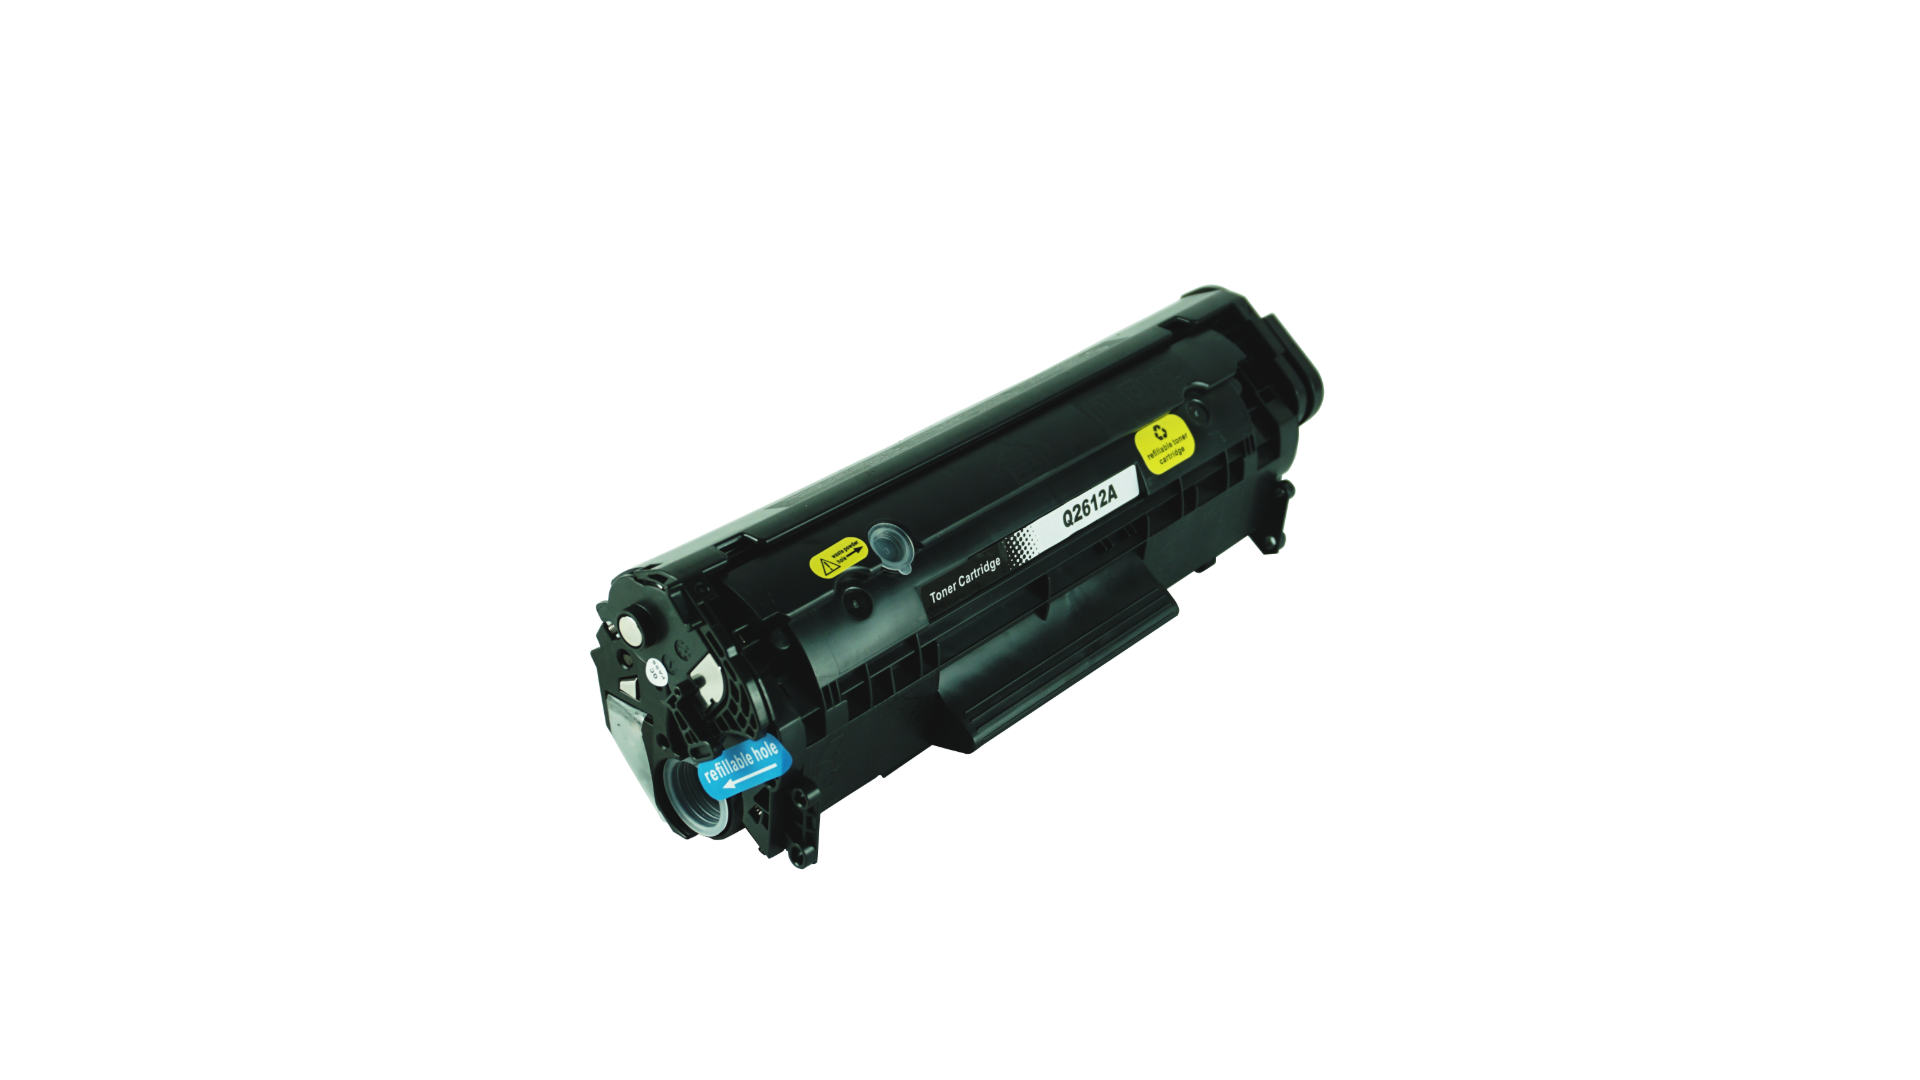 Compatible Q2612A 12A Laser Toner Cartridge For Use In HP Q2612 2612A 2612 HP LJ 1010 / 1012 / 1015 / 1018 / 1020 / 1022 / 3015 / 3020 / 3030 / 3050 / 3052 / 3055 / M1005 / M1005MFP / M1319 / M1319MFP